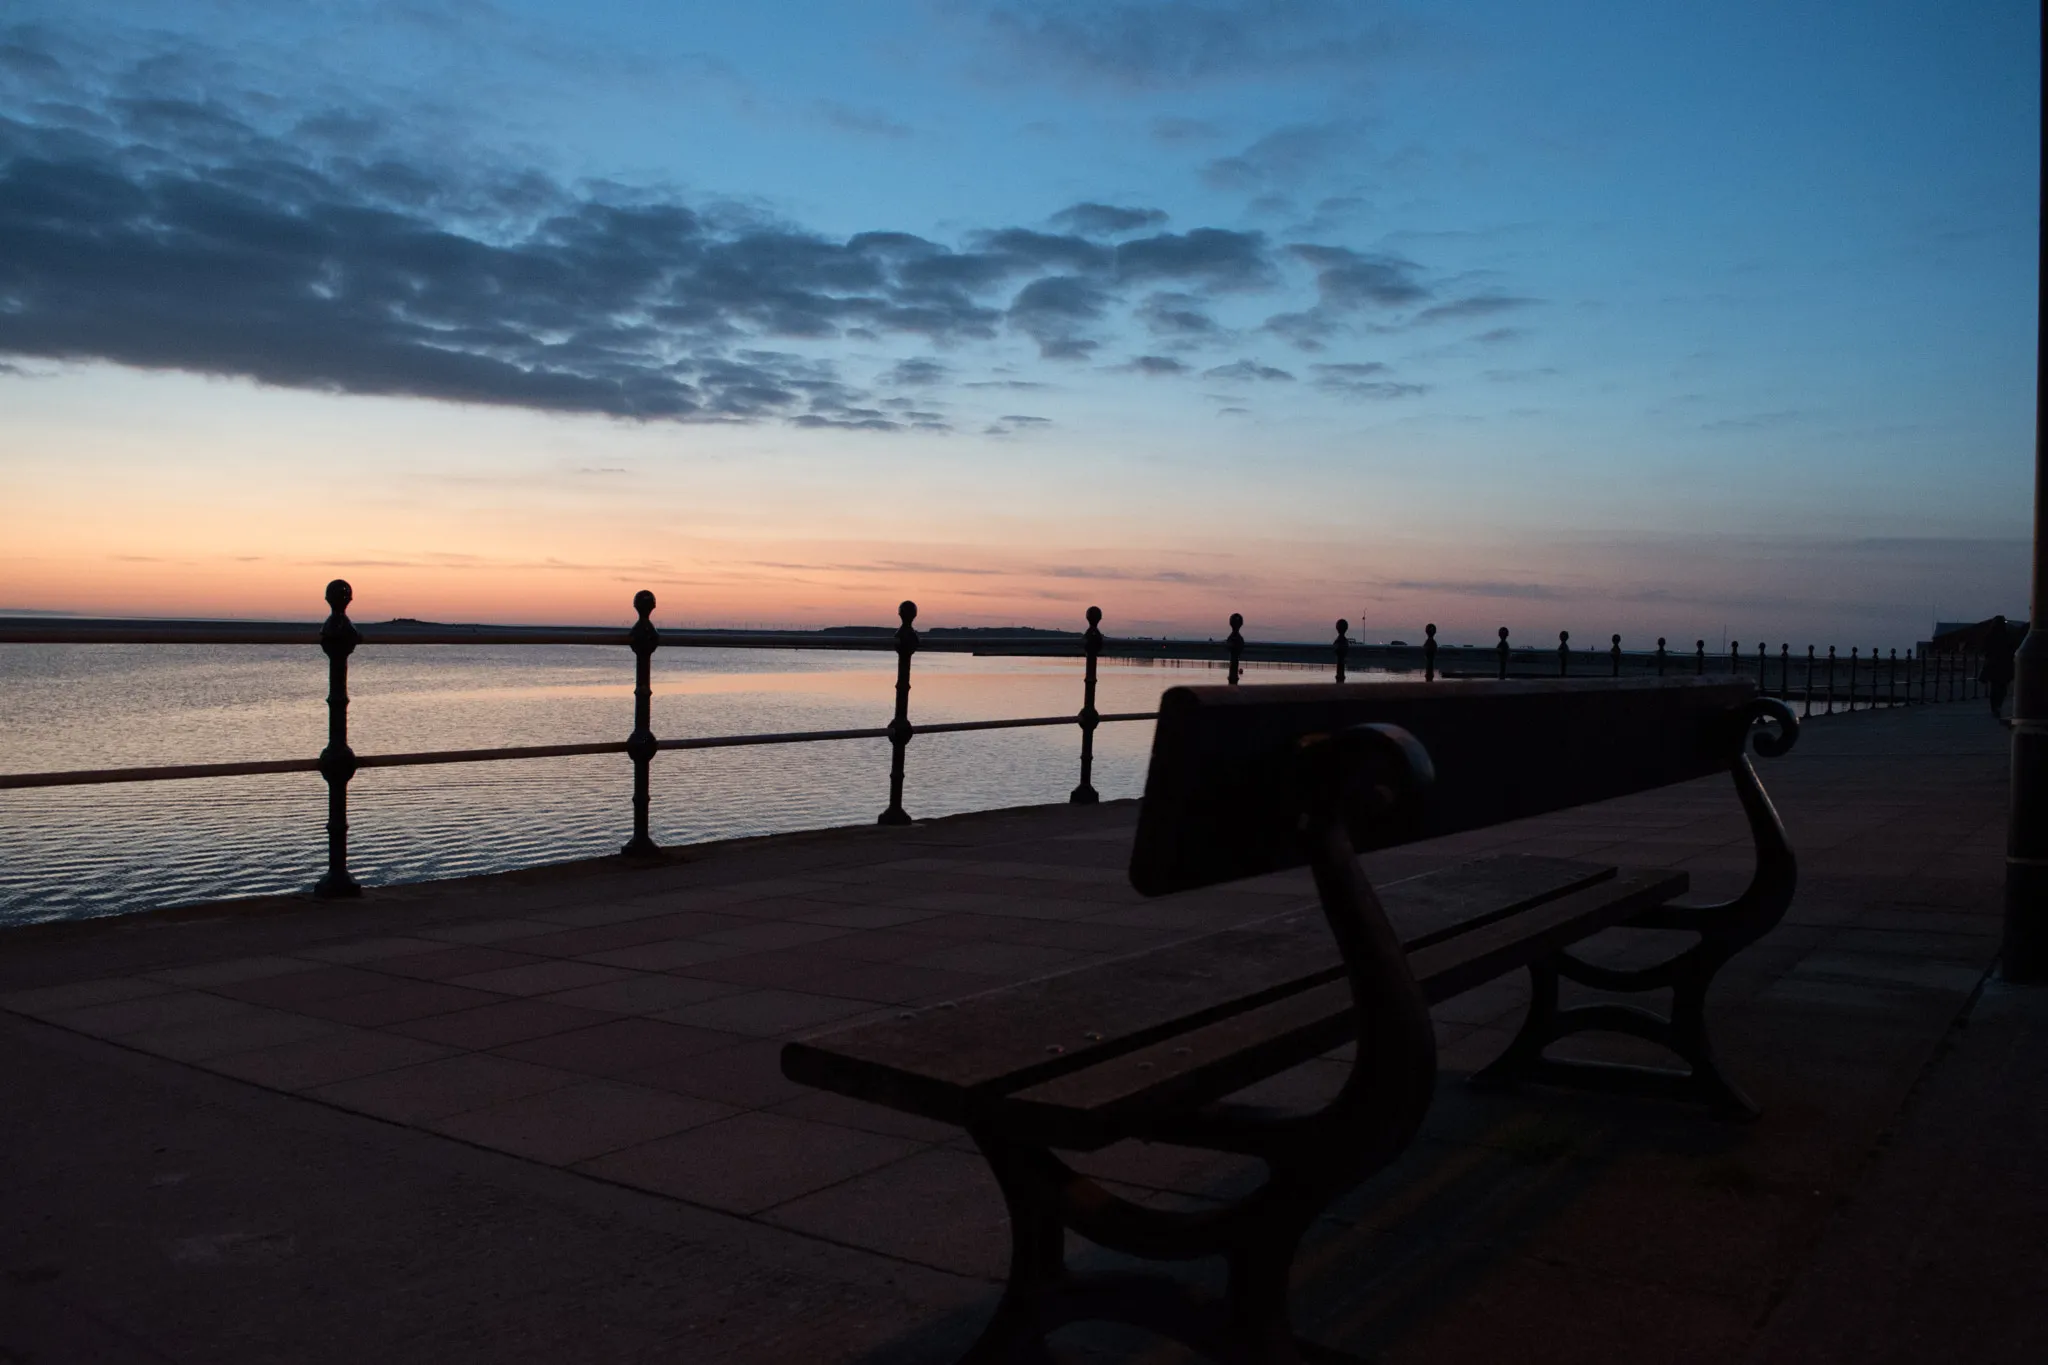 Photo showing: 500px provided description: Bench facing West Kirkby Marina looking out over the water, shortly after sunset. [#Landscape ,#England ,#UK ,#Water ,#Street ,#Bench ,#Sky ,#Sunset ,#Clouds ,#River ,#Merseyside ,#Wirral ,#Railings ,#Promenade ,#River Dee ,#River Mersey ,#West Kirkby Marina ,#West Kirkby]